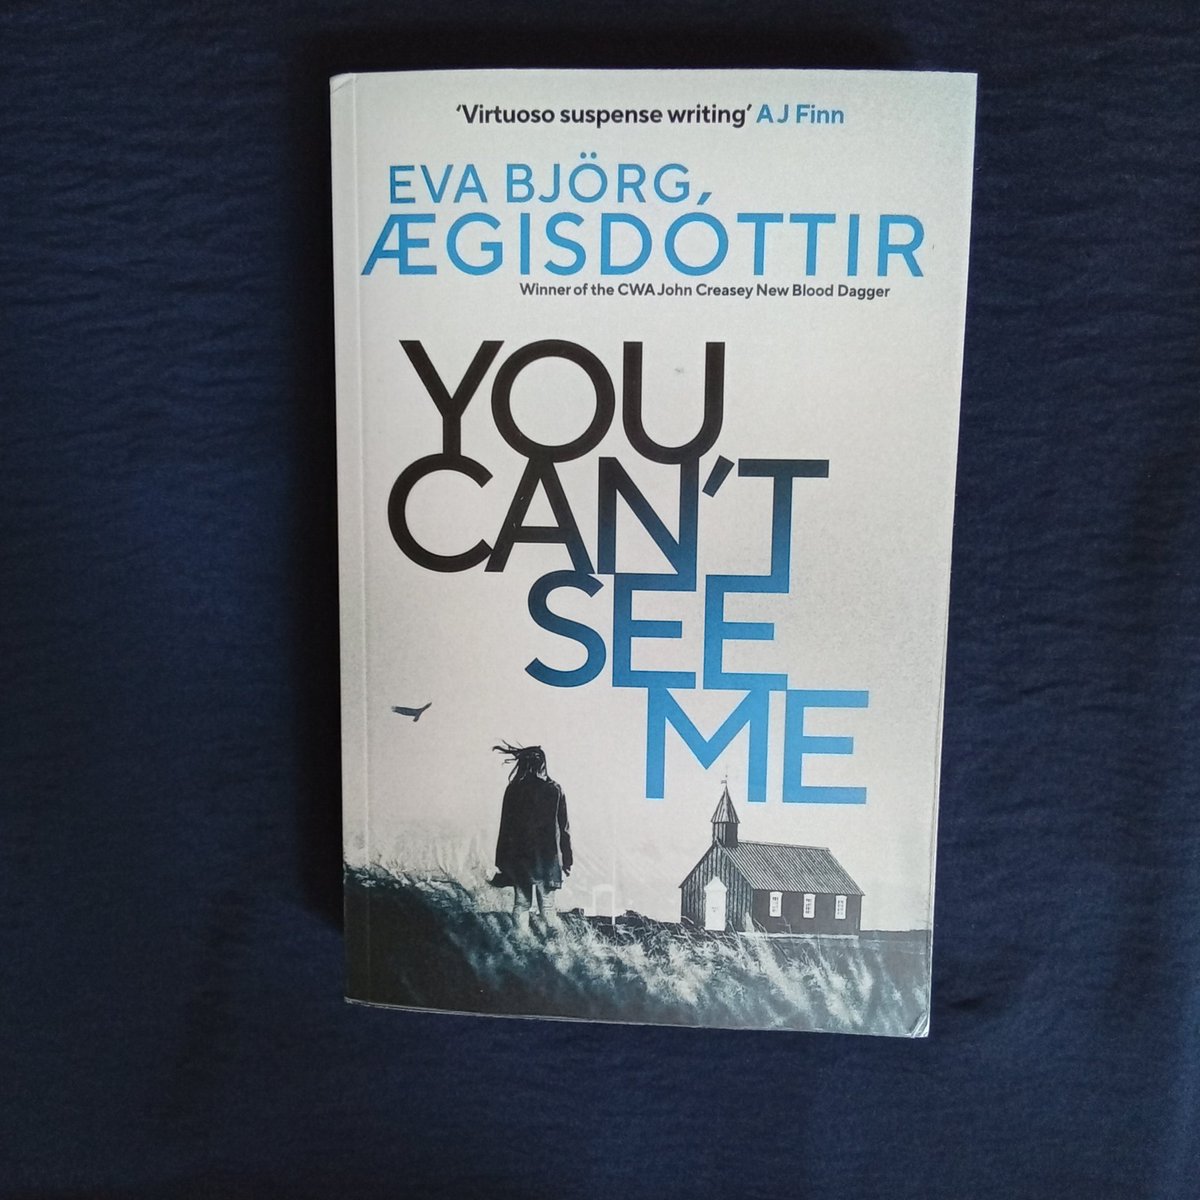 A fabulous prequel to the #ForbiddenIceland series. #Youcantseeme by Eva BJorg AEgisdottir is a intriguing look at life before Elma joins the CID. Full of twists and turns it keeps you guessing to nearly the very last page, Published by @OrendaBooks its out in July . Recommended.